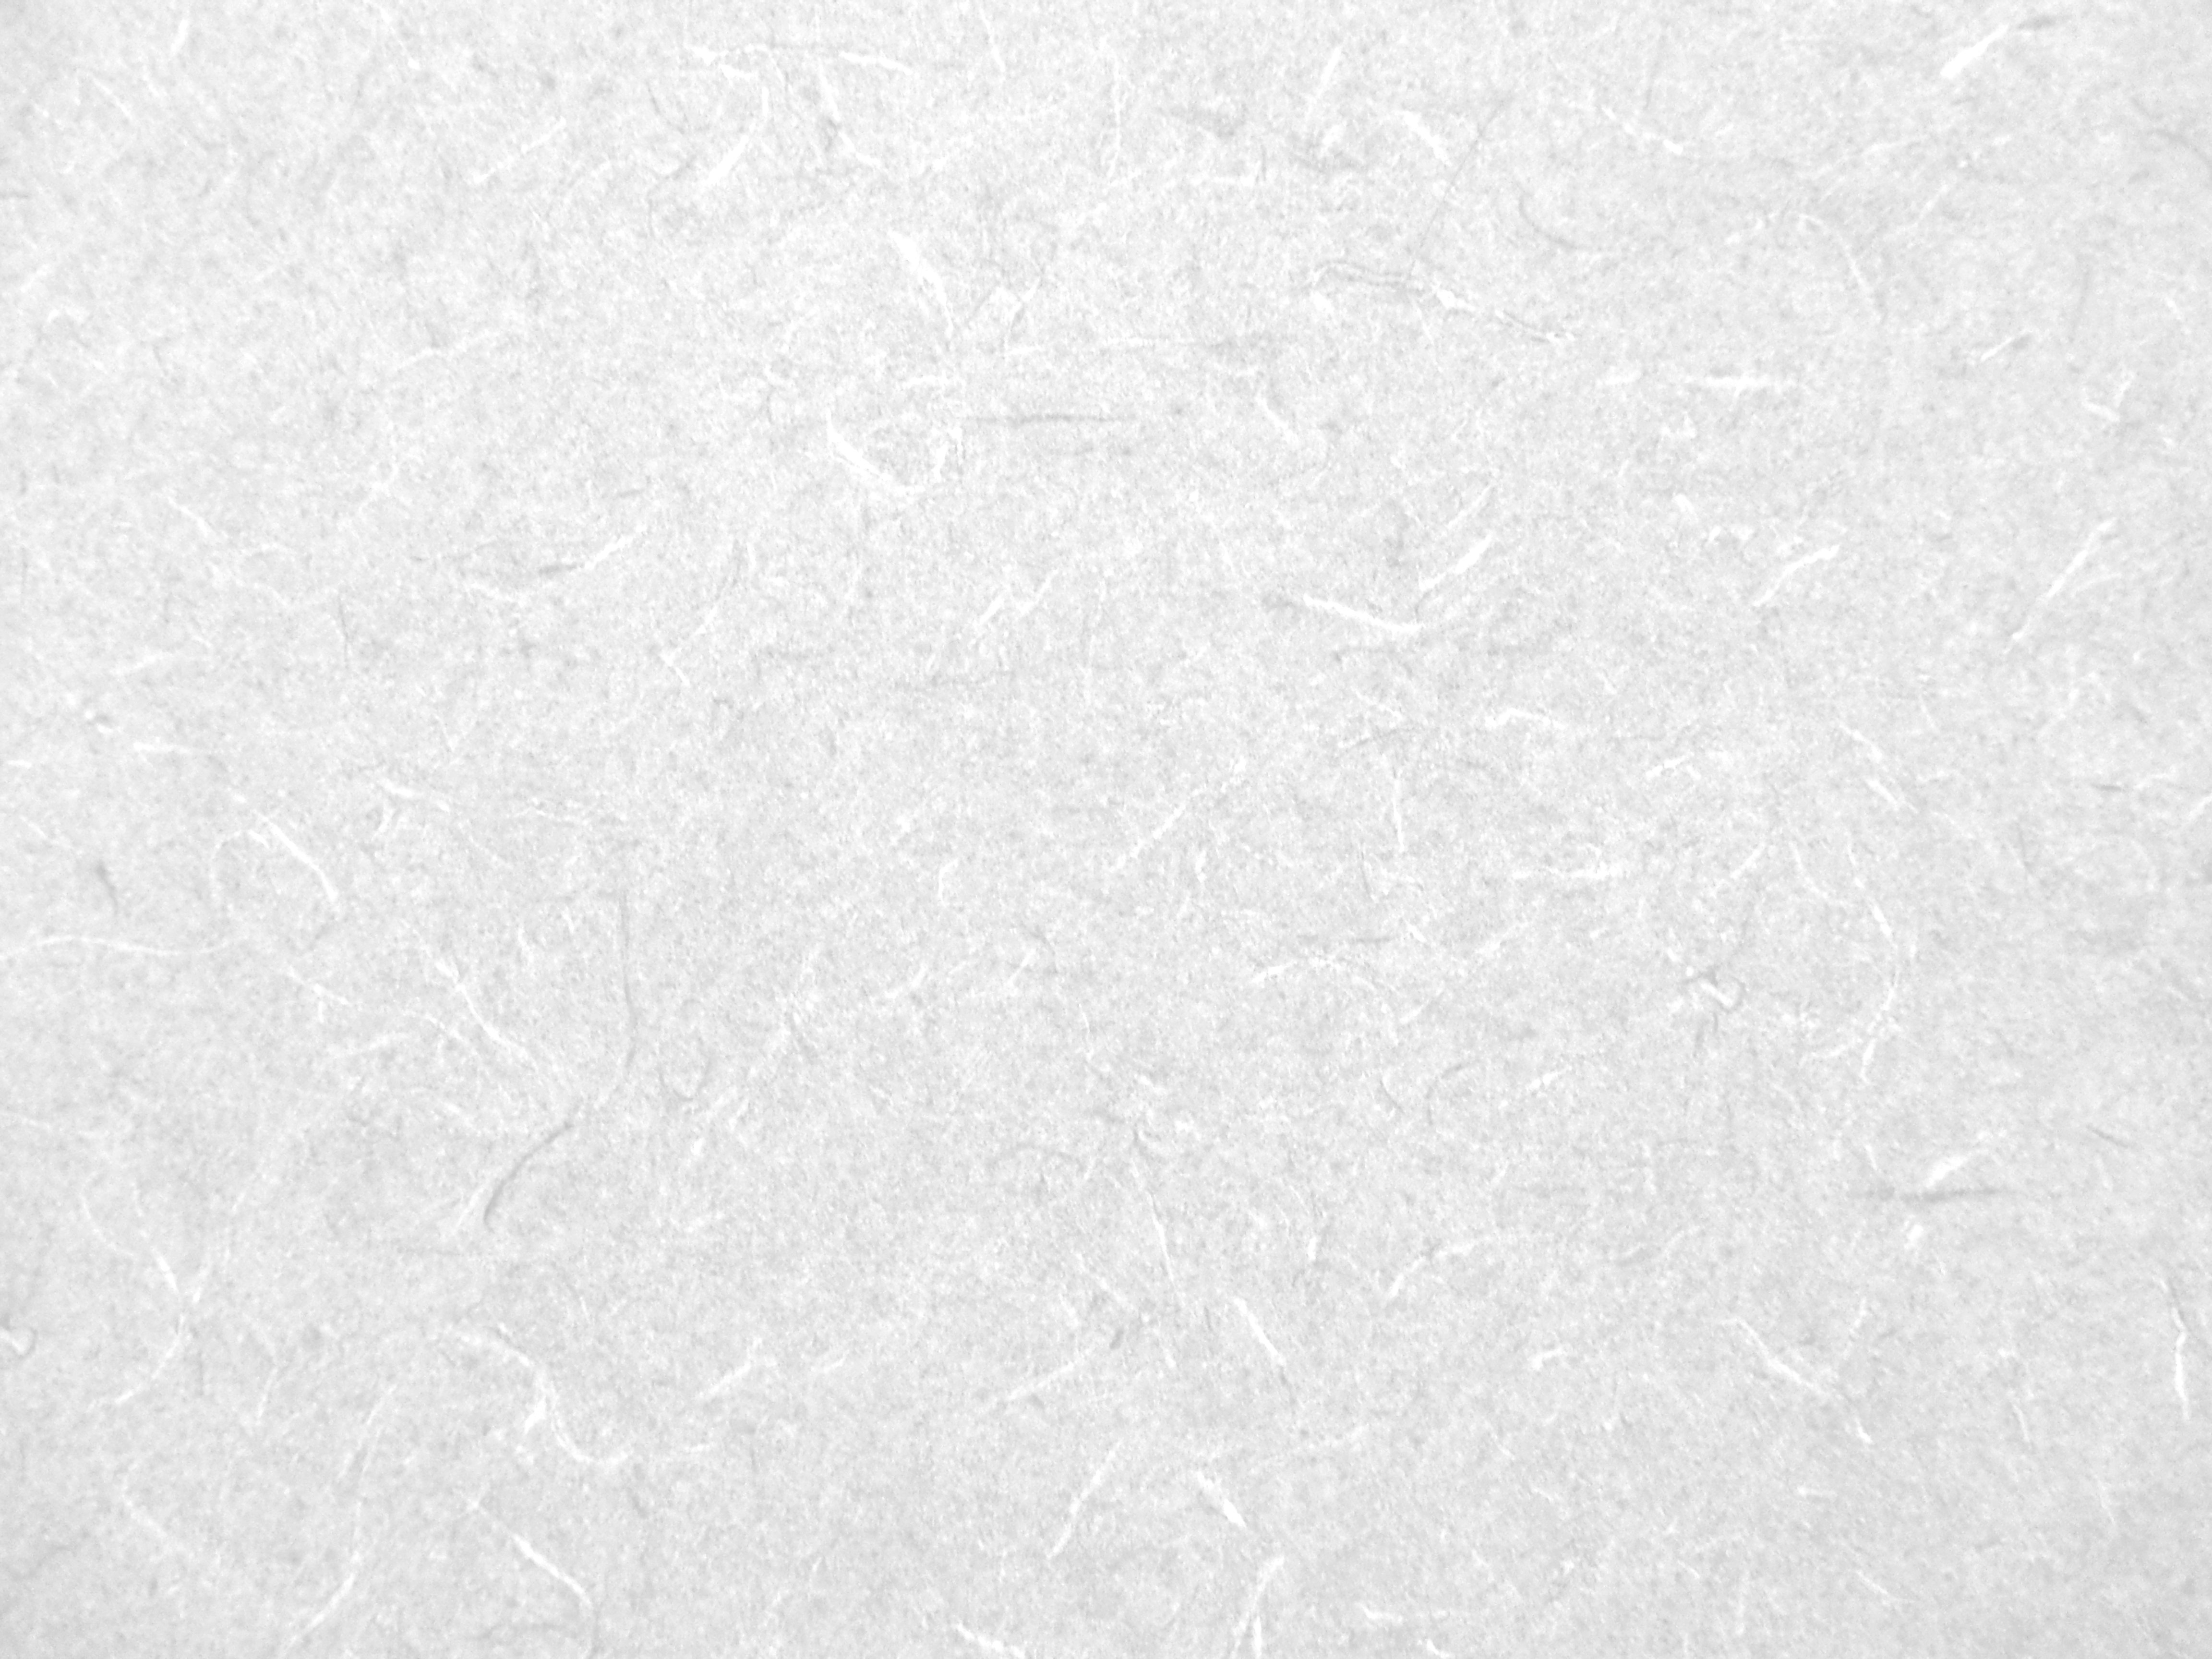 White Abstract Pattern Laminate Countertop Texture Picture Free